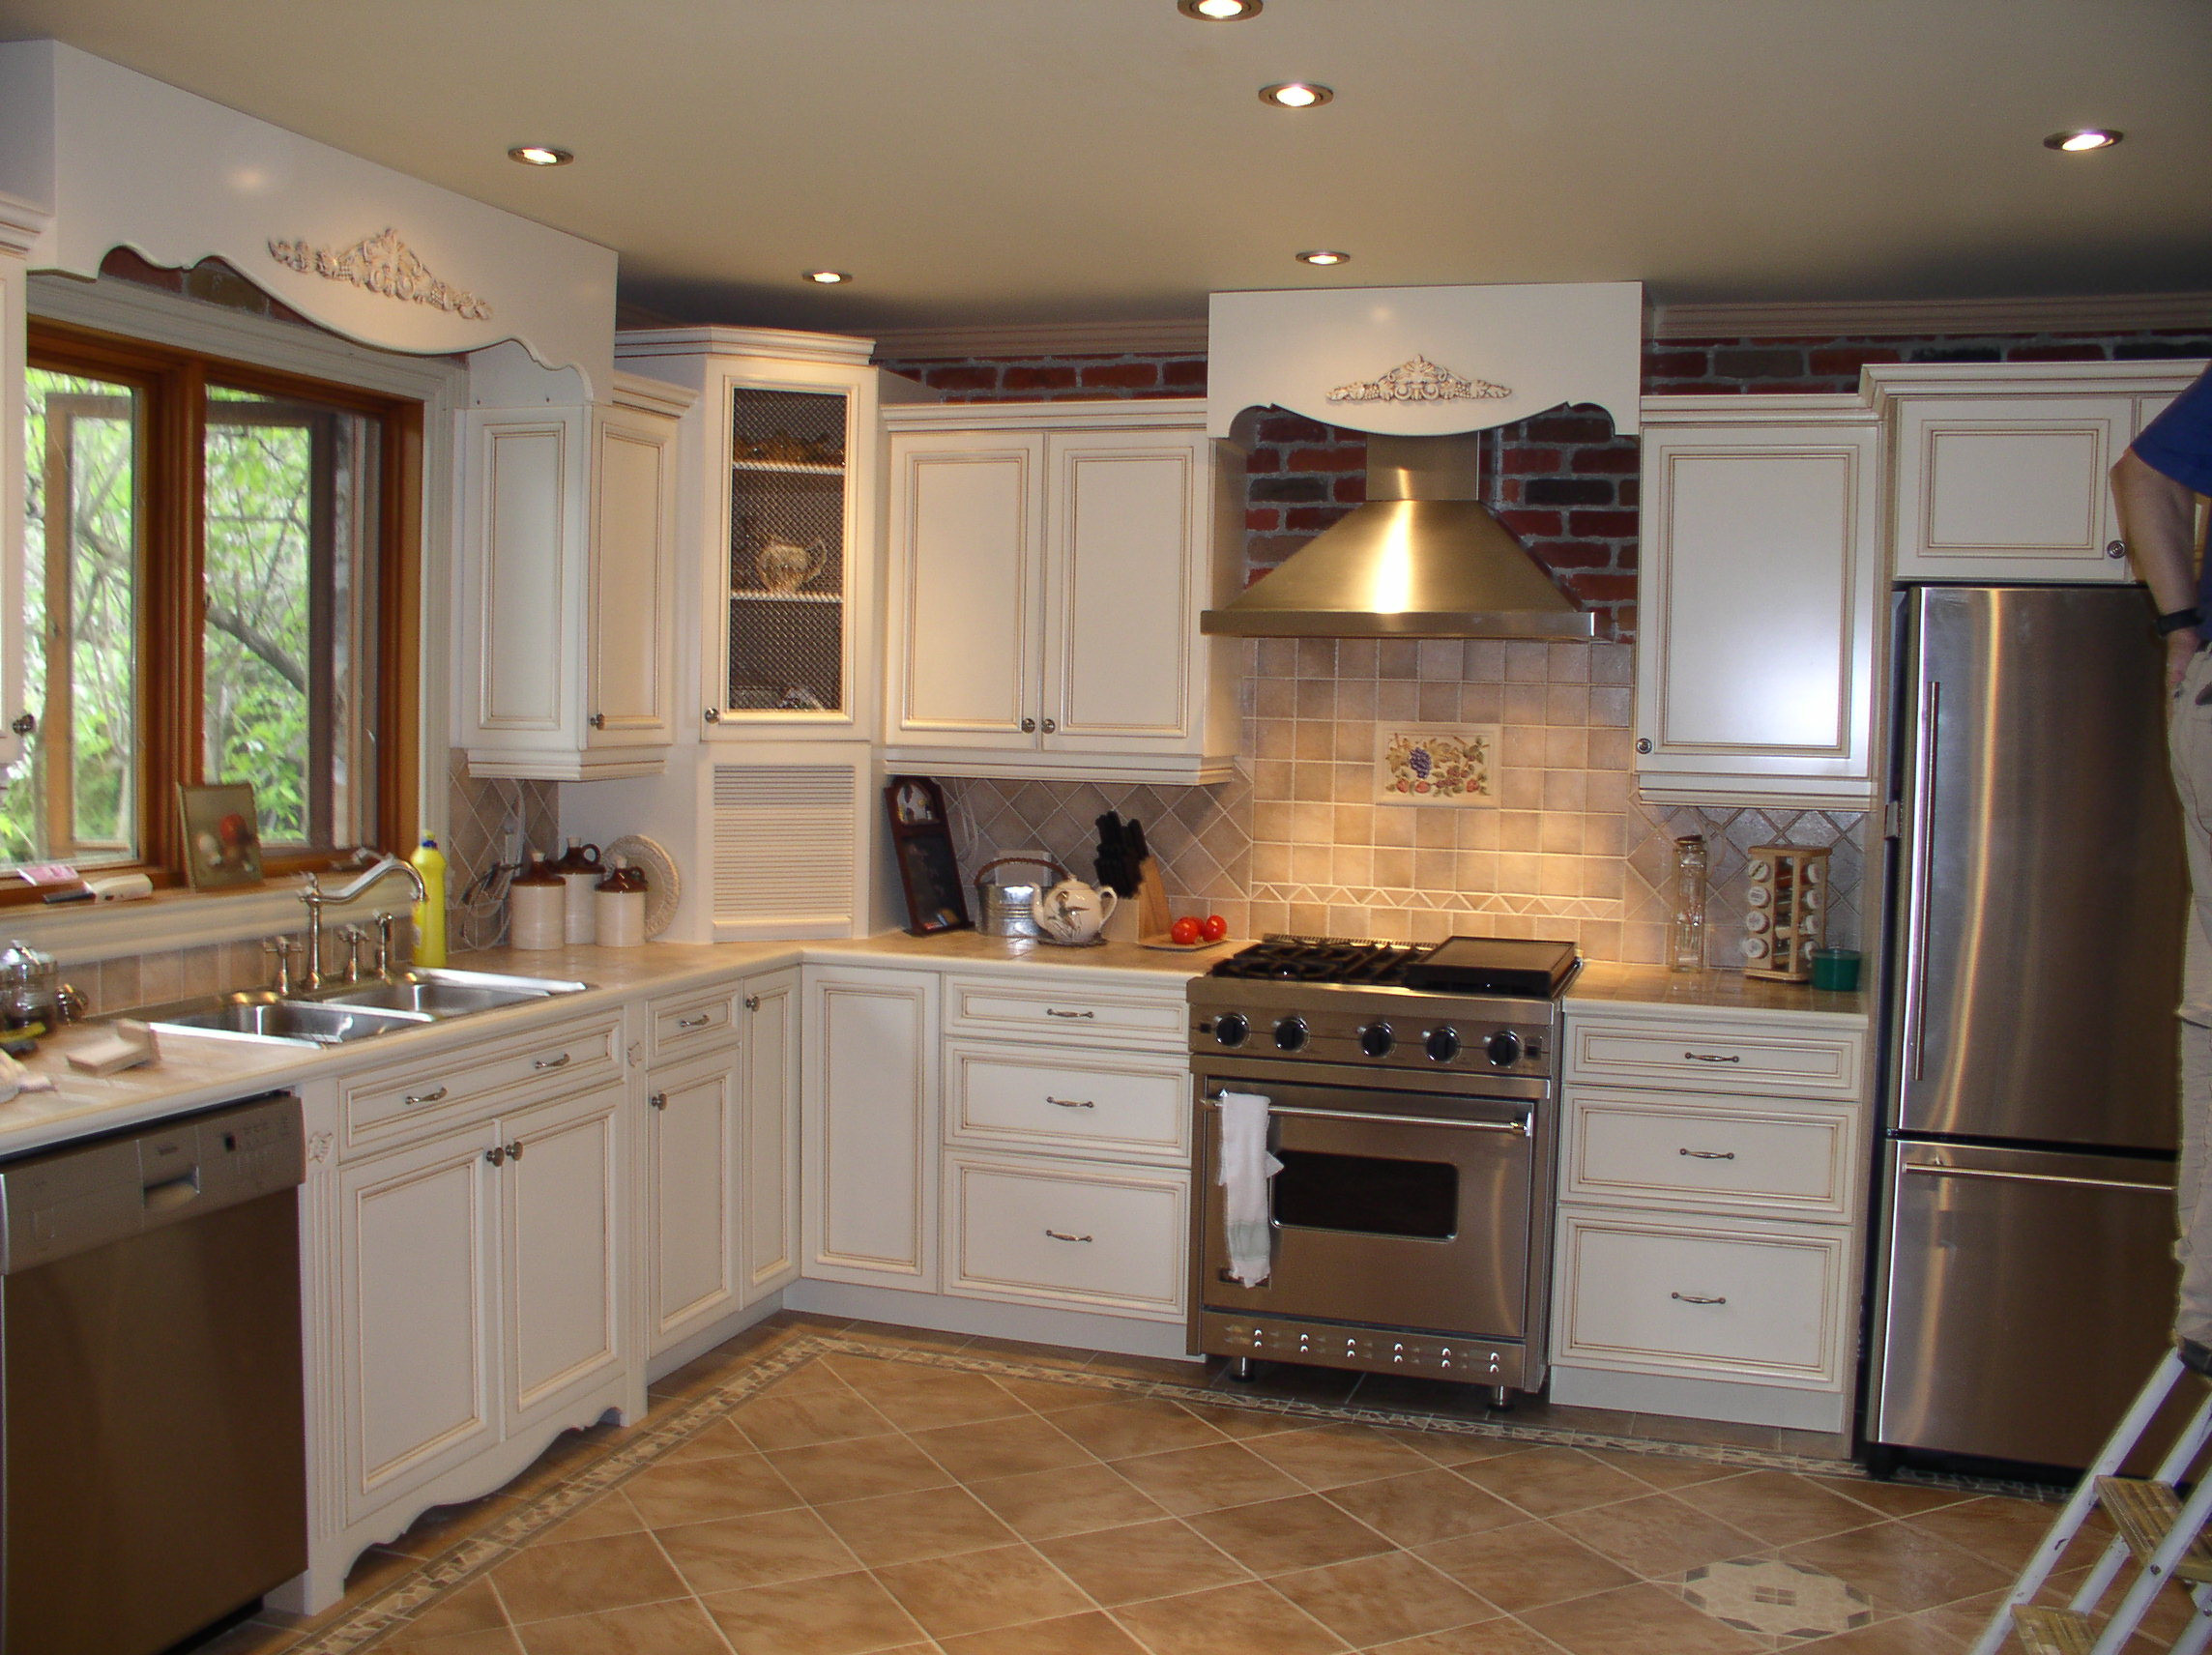 Kitchen Remodel Ideas Pictures
 Kitchen Remodeling Ideas & s